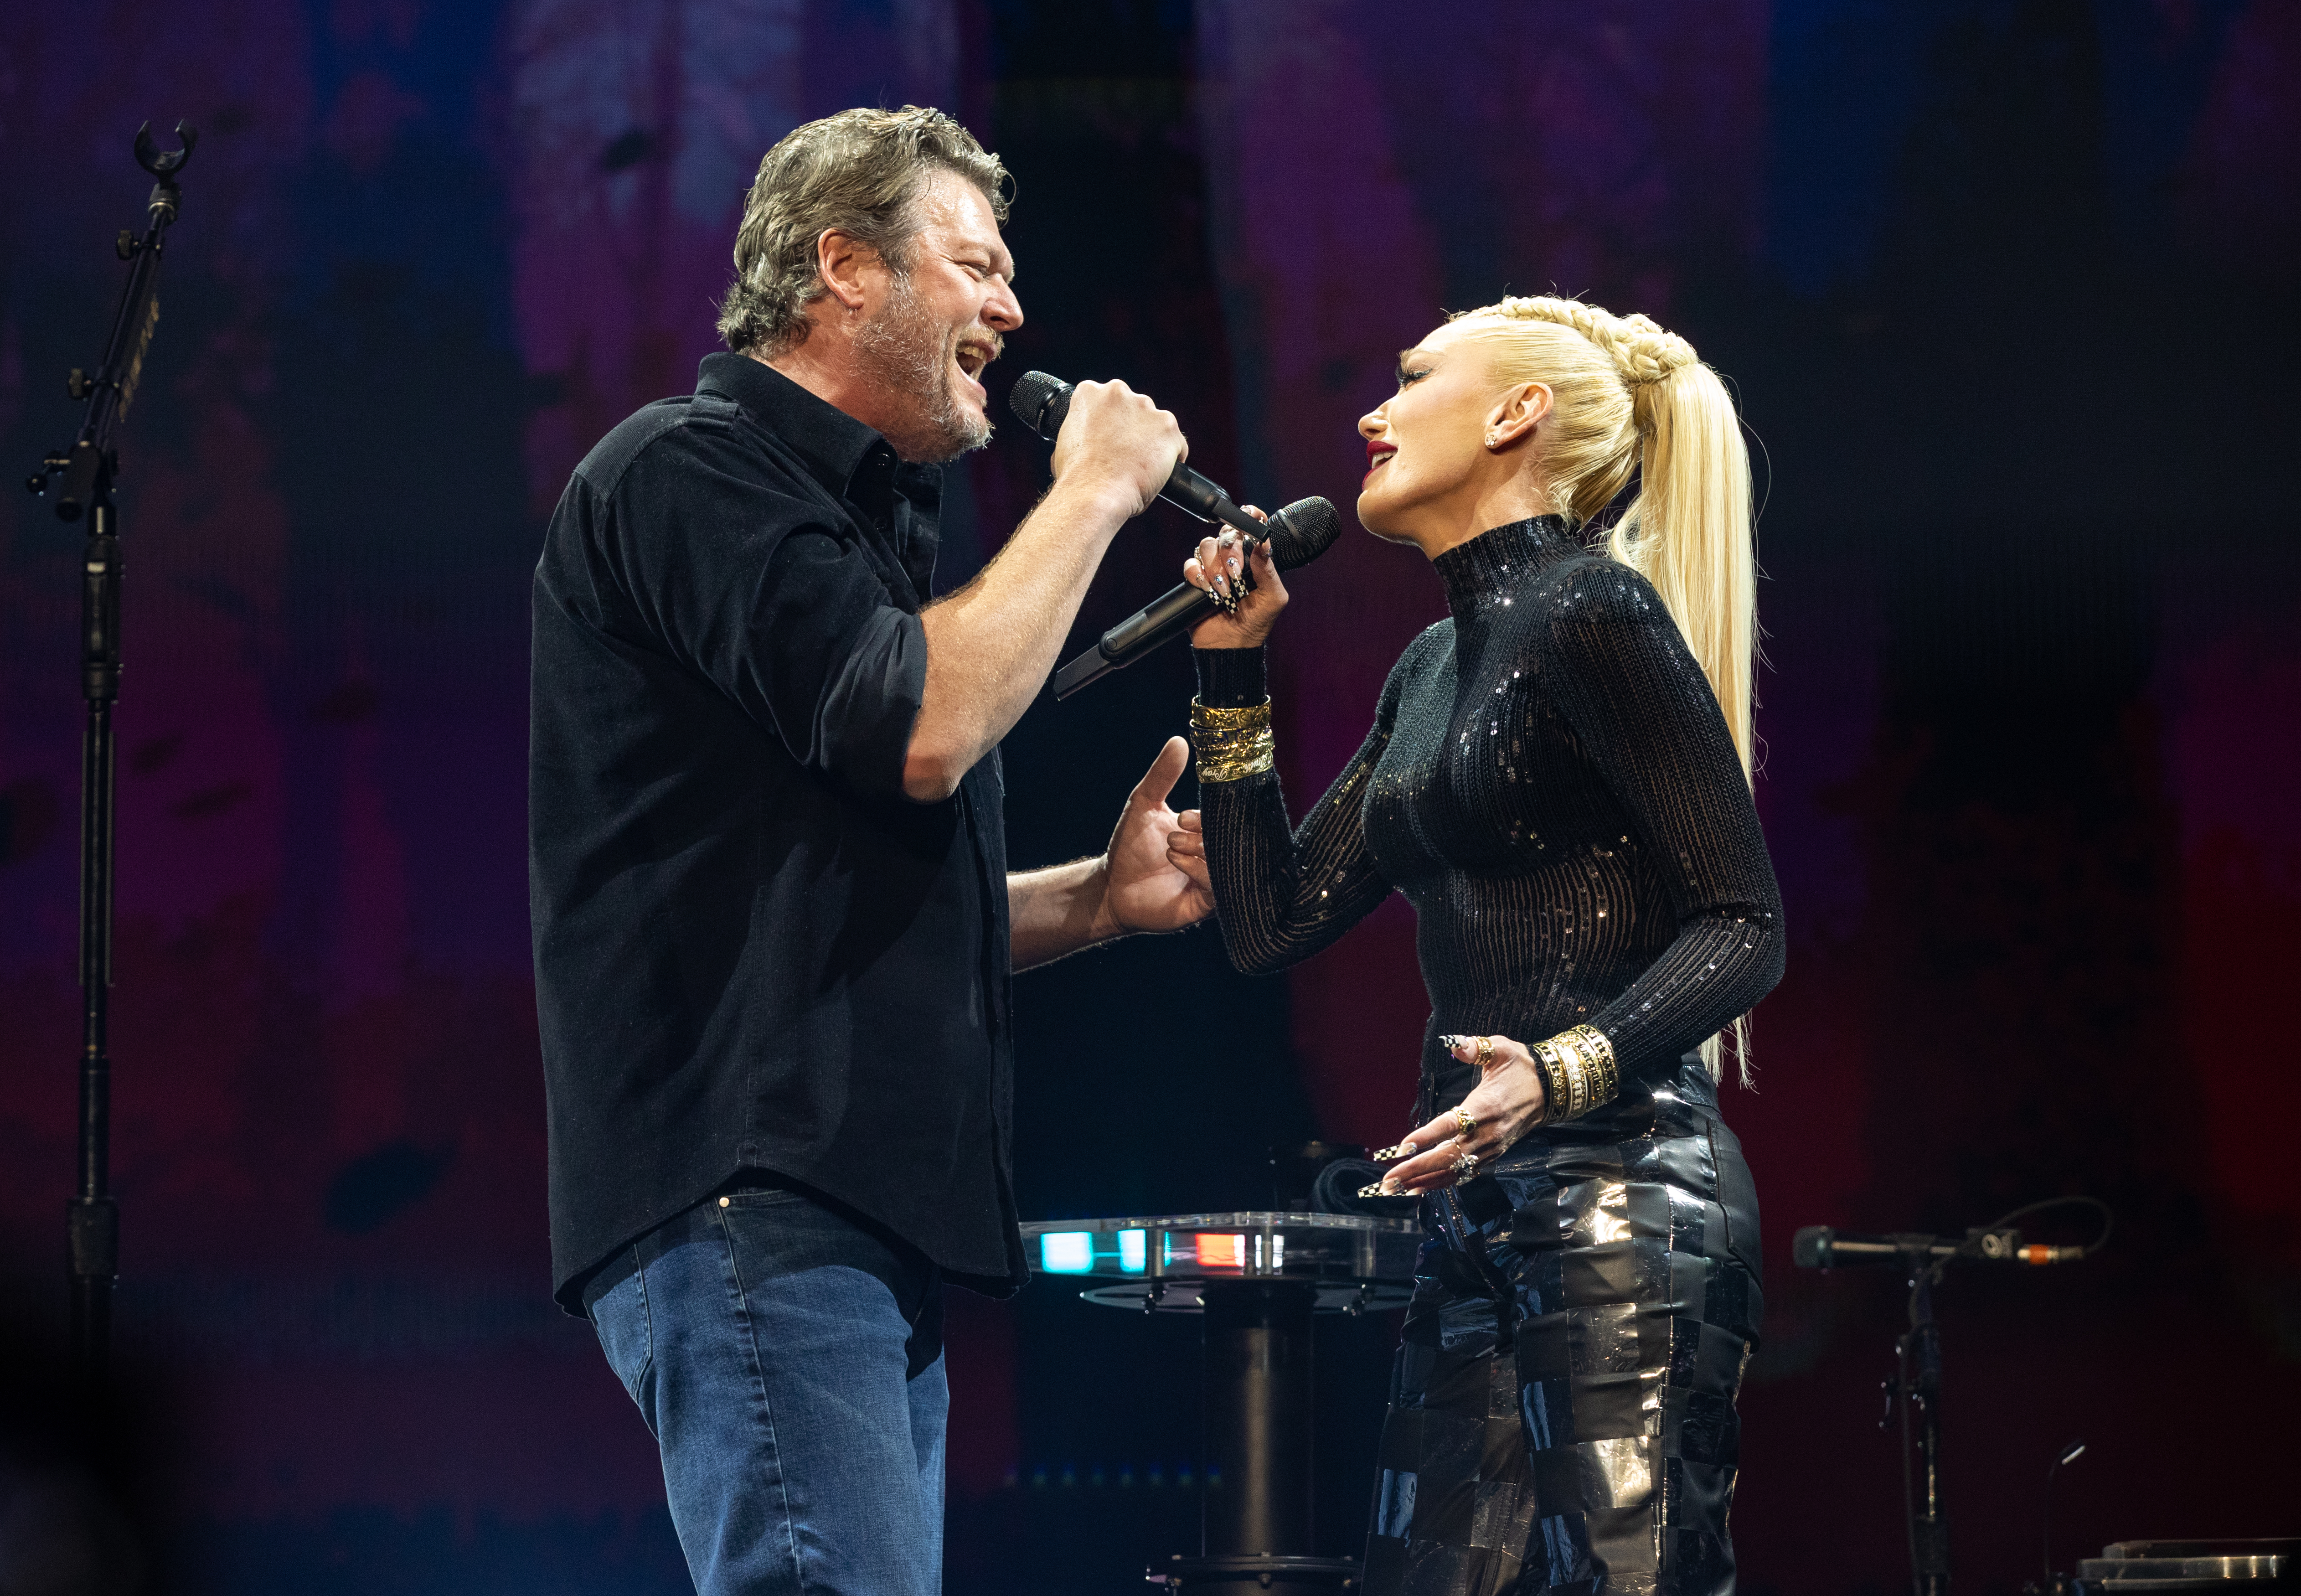 Gwen recently joined Blake onstage to sing their new love duet, Purple Irises, released last month